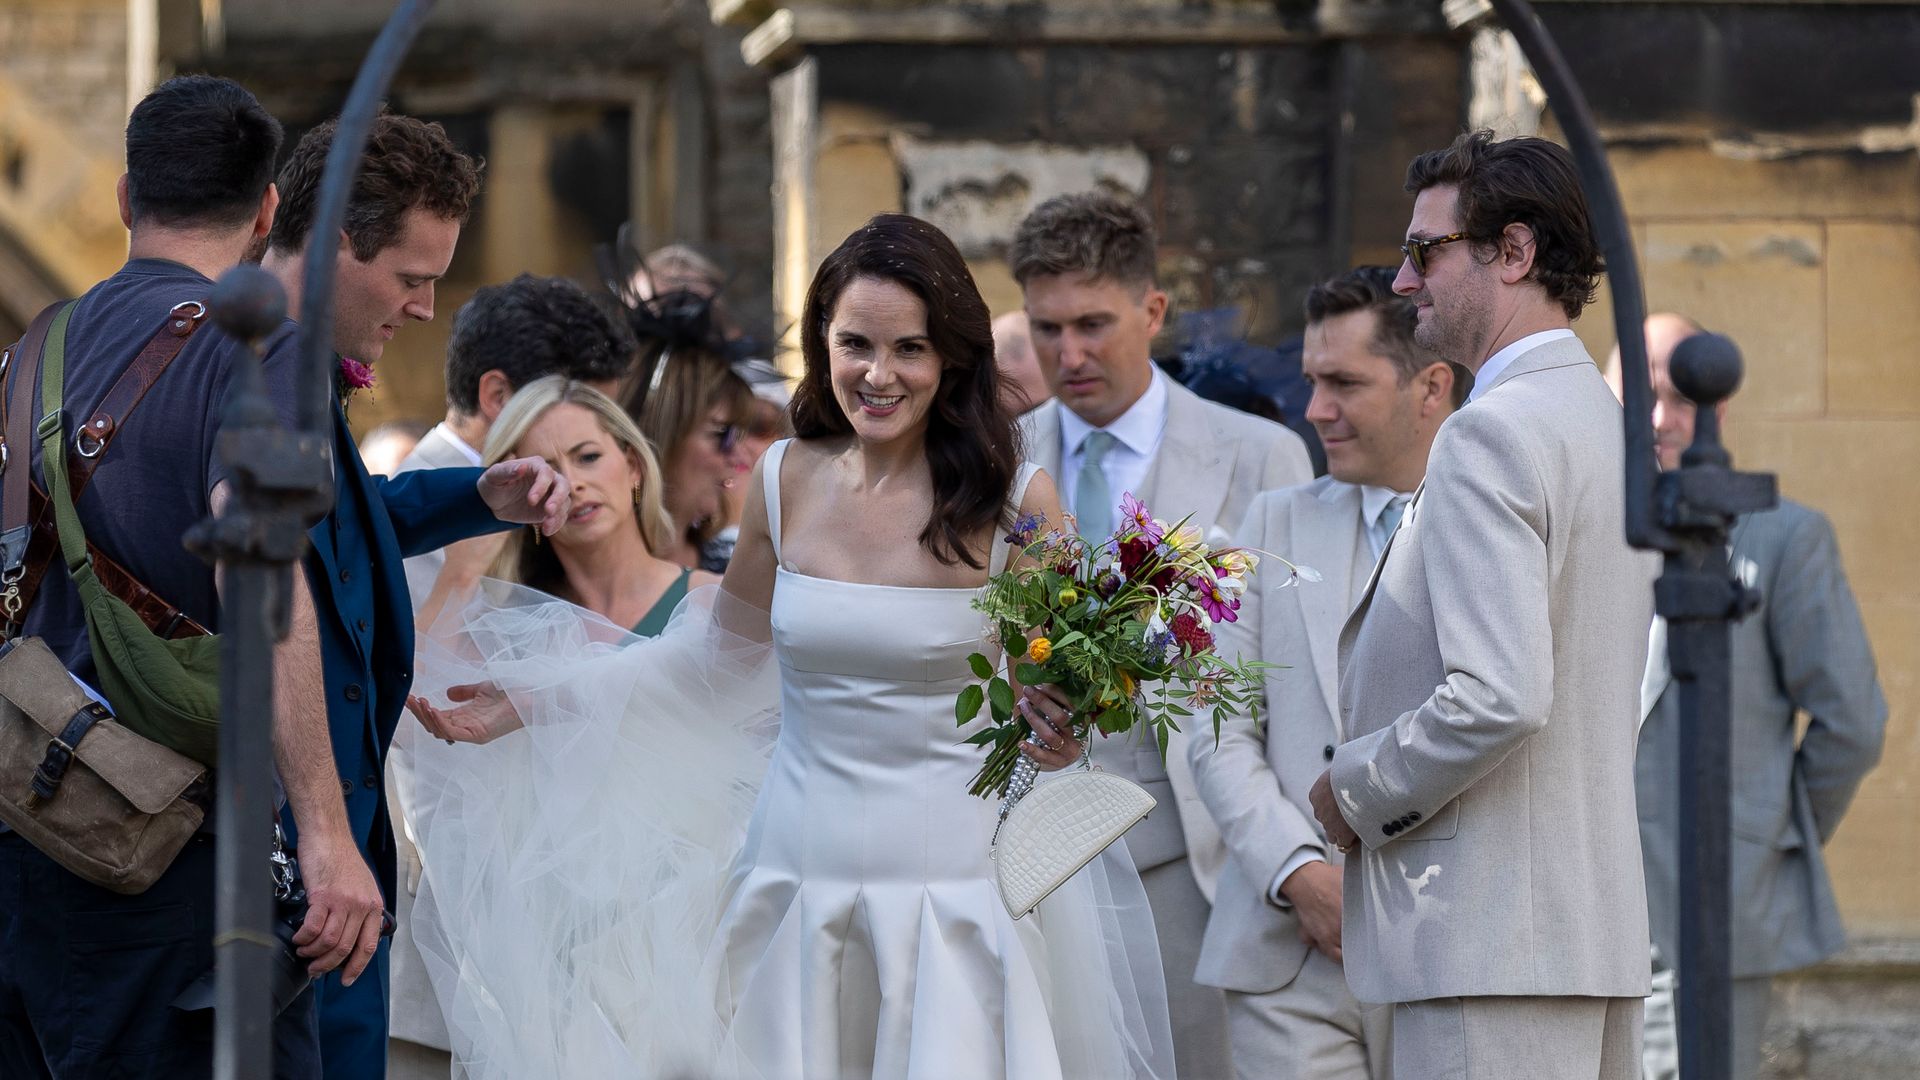 Laura Carmichael acts as a bridesmaid for Michelle Dockery as she ties the knot with Jasper Waller-Bridge
